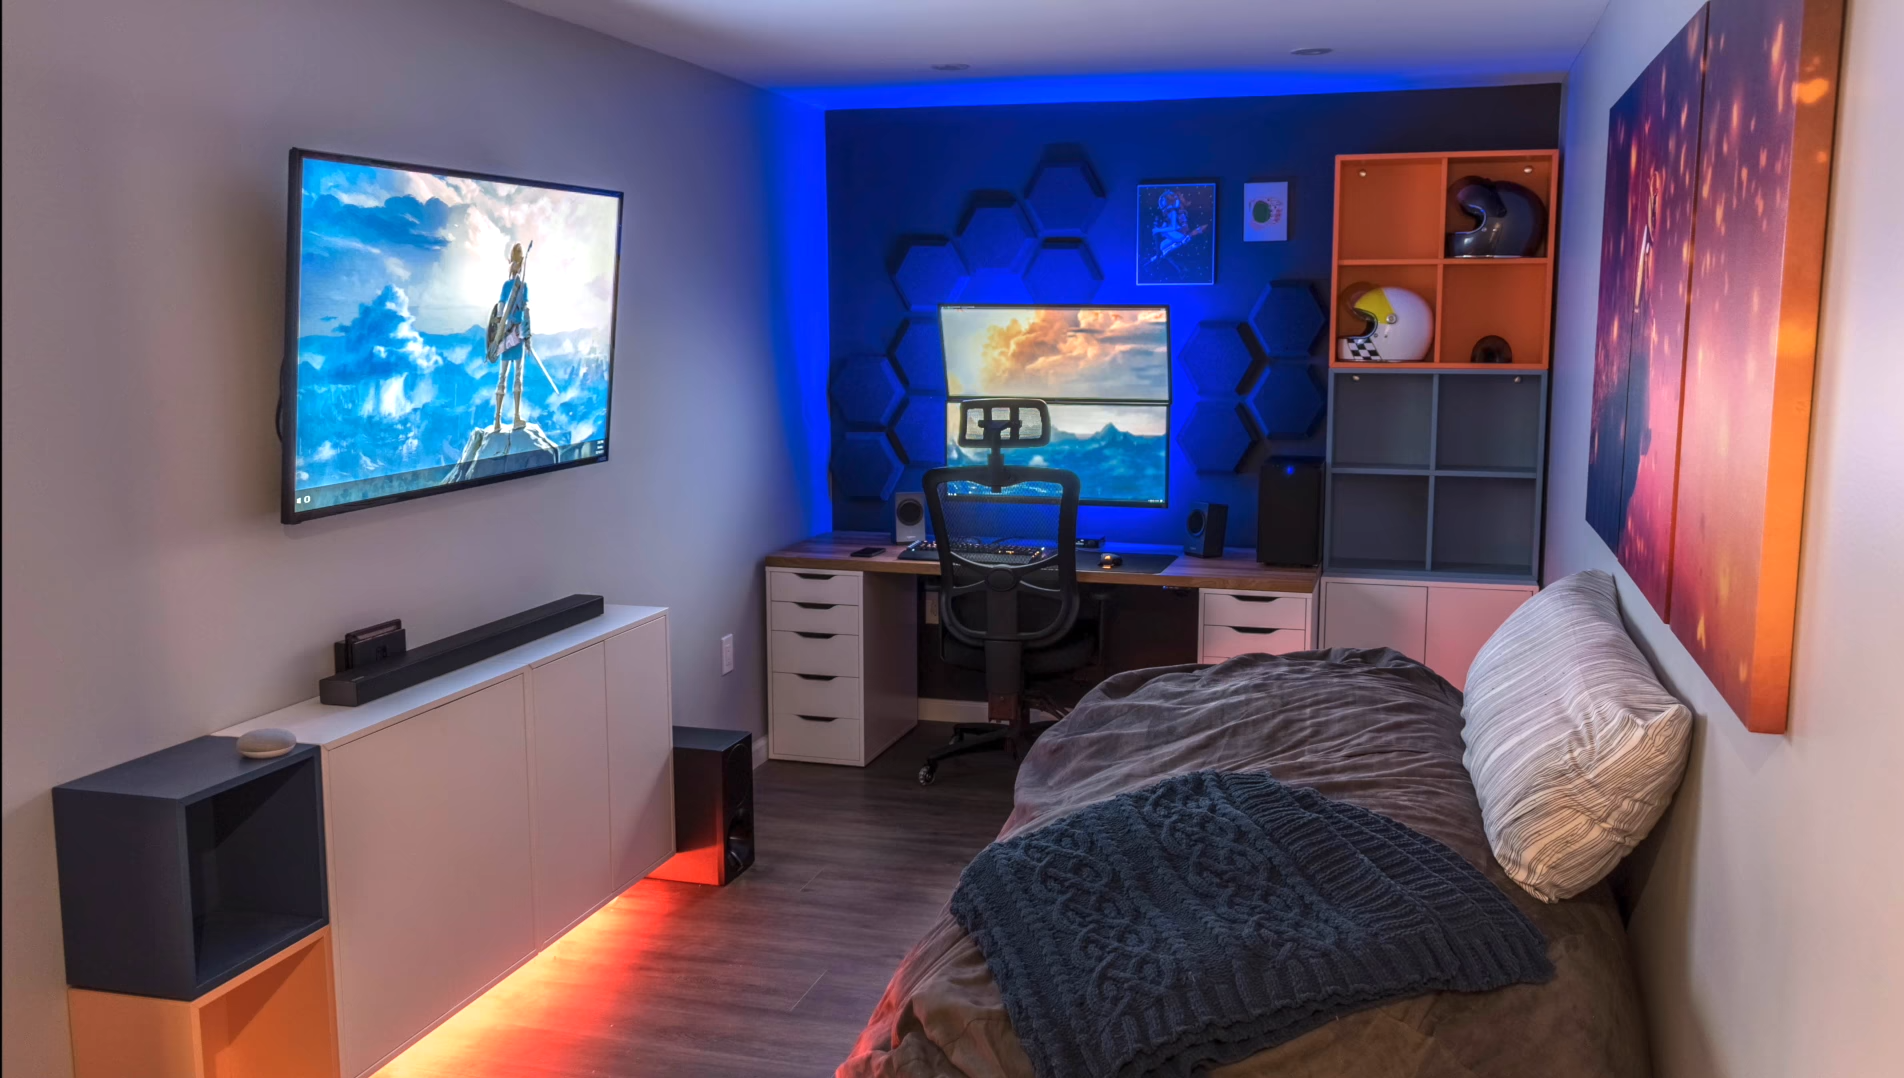 Epic Video Game Room Ideas that are Still Modern and Functional | LaptrinhX